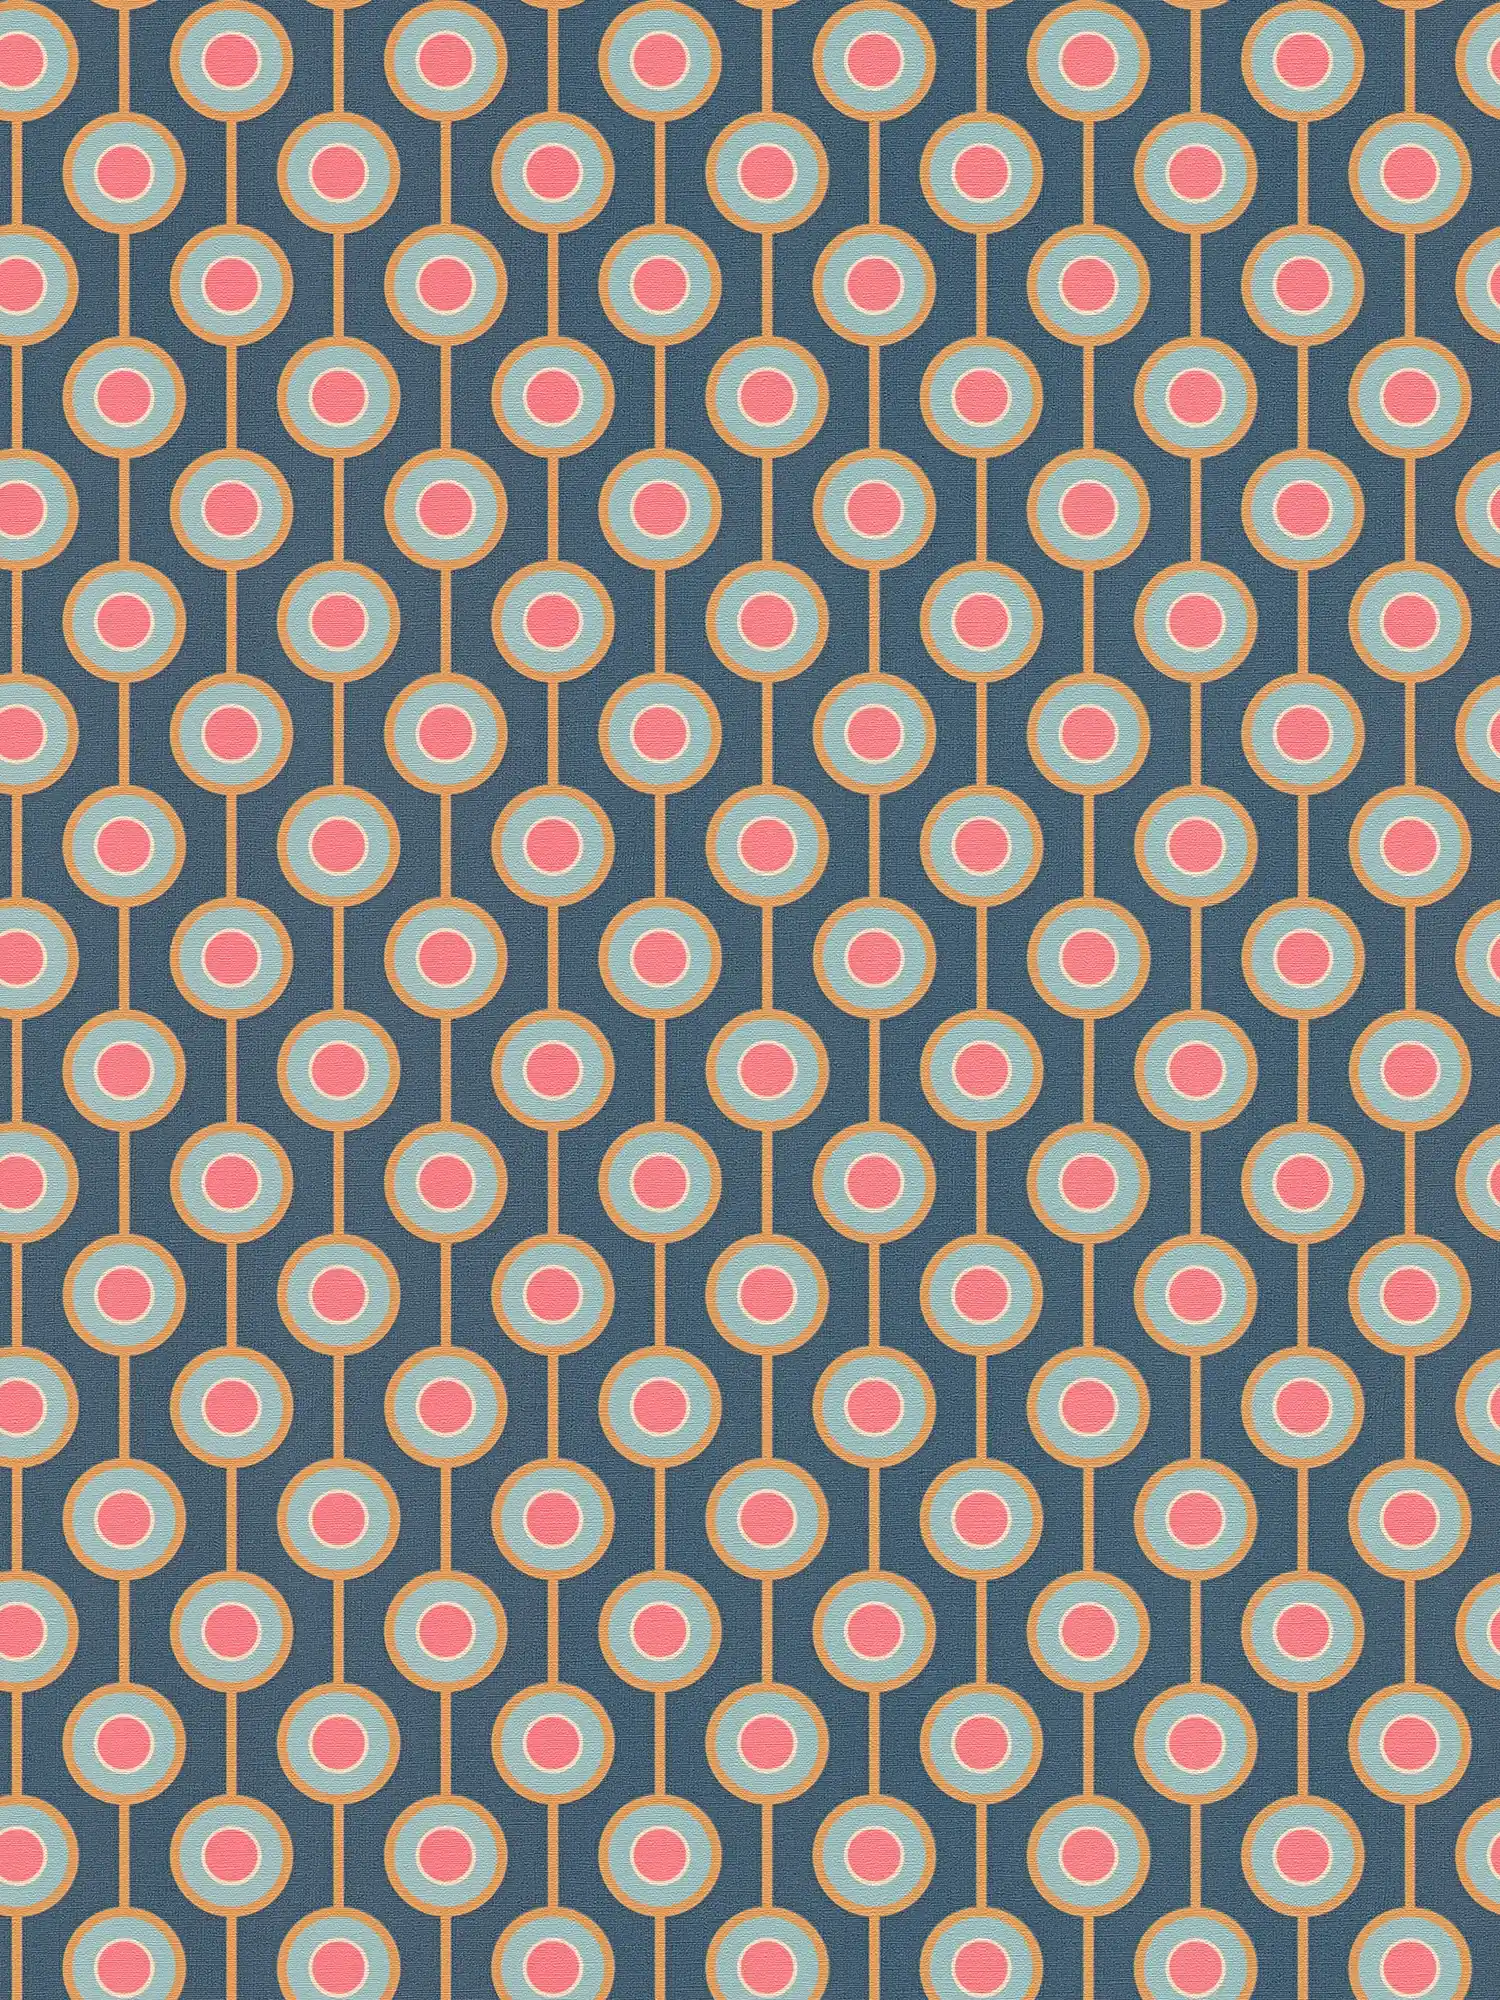 Retro wallpaper with light structure and circle pattern - blue, yellow, pink
